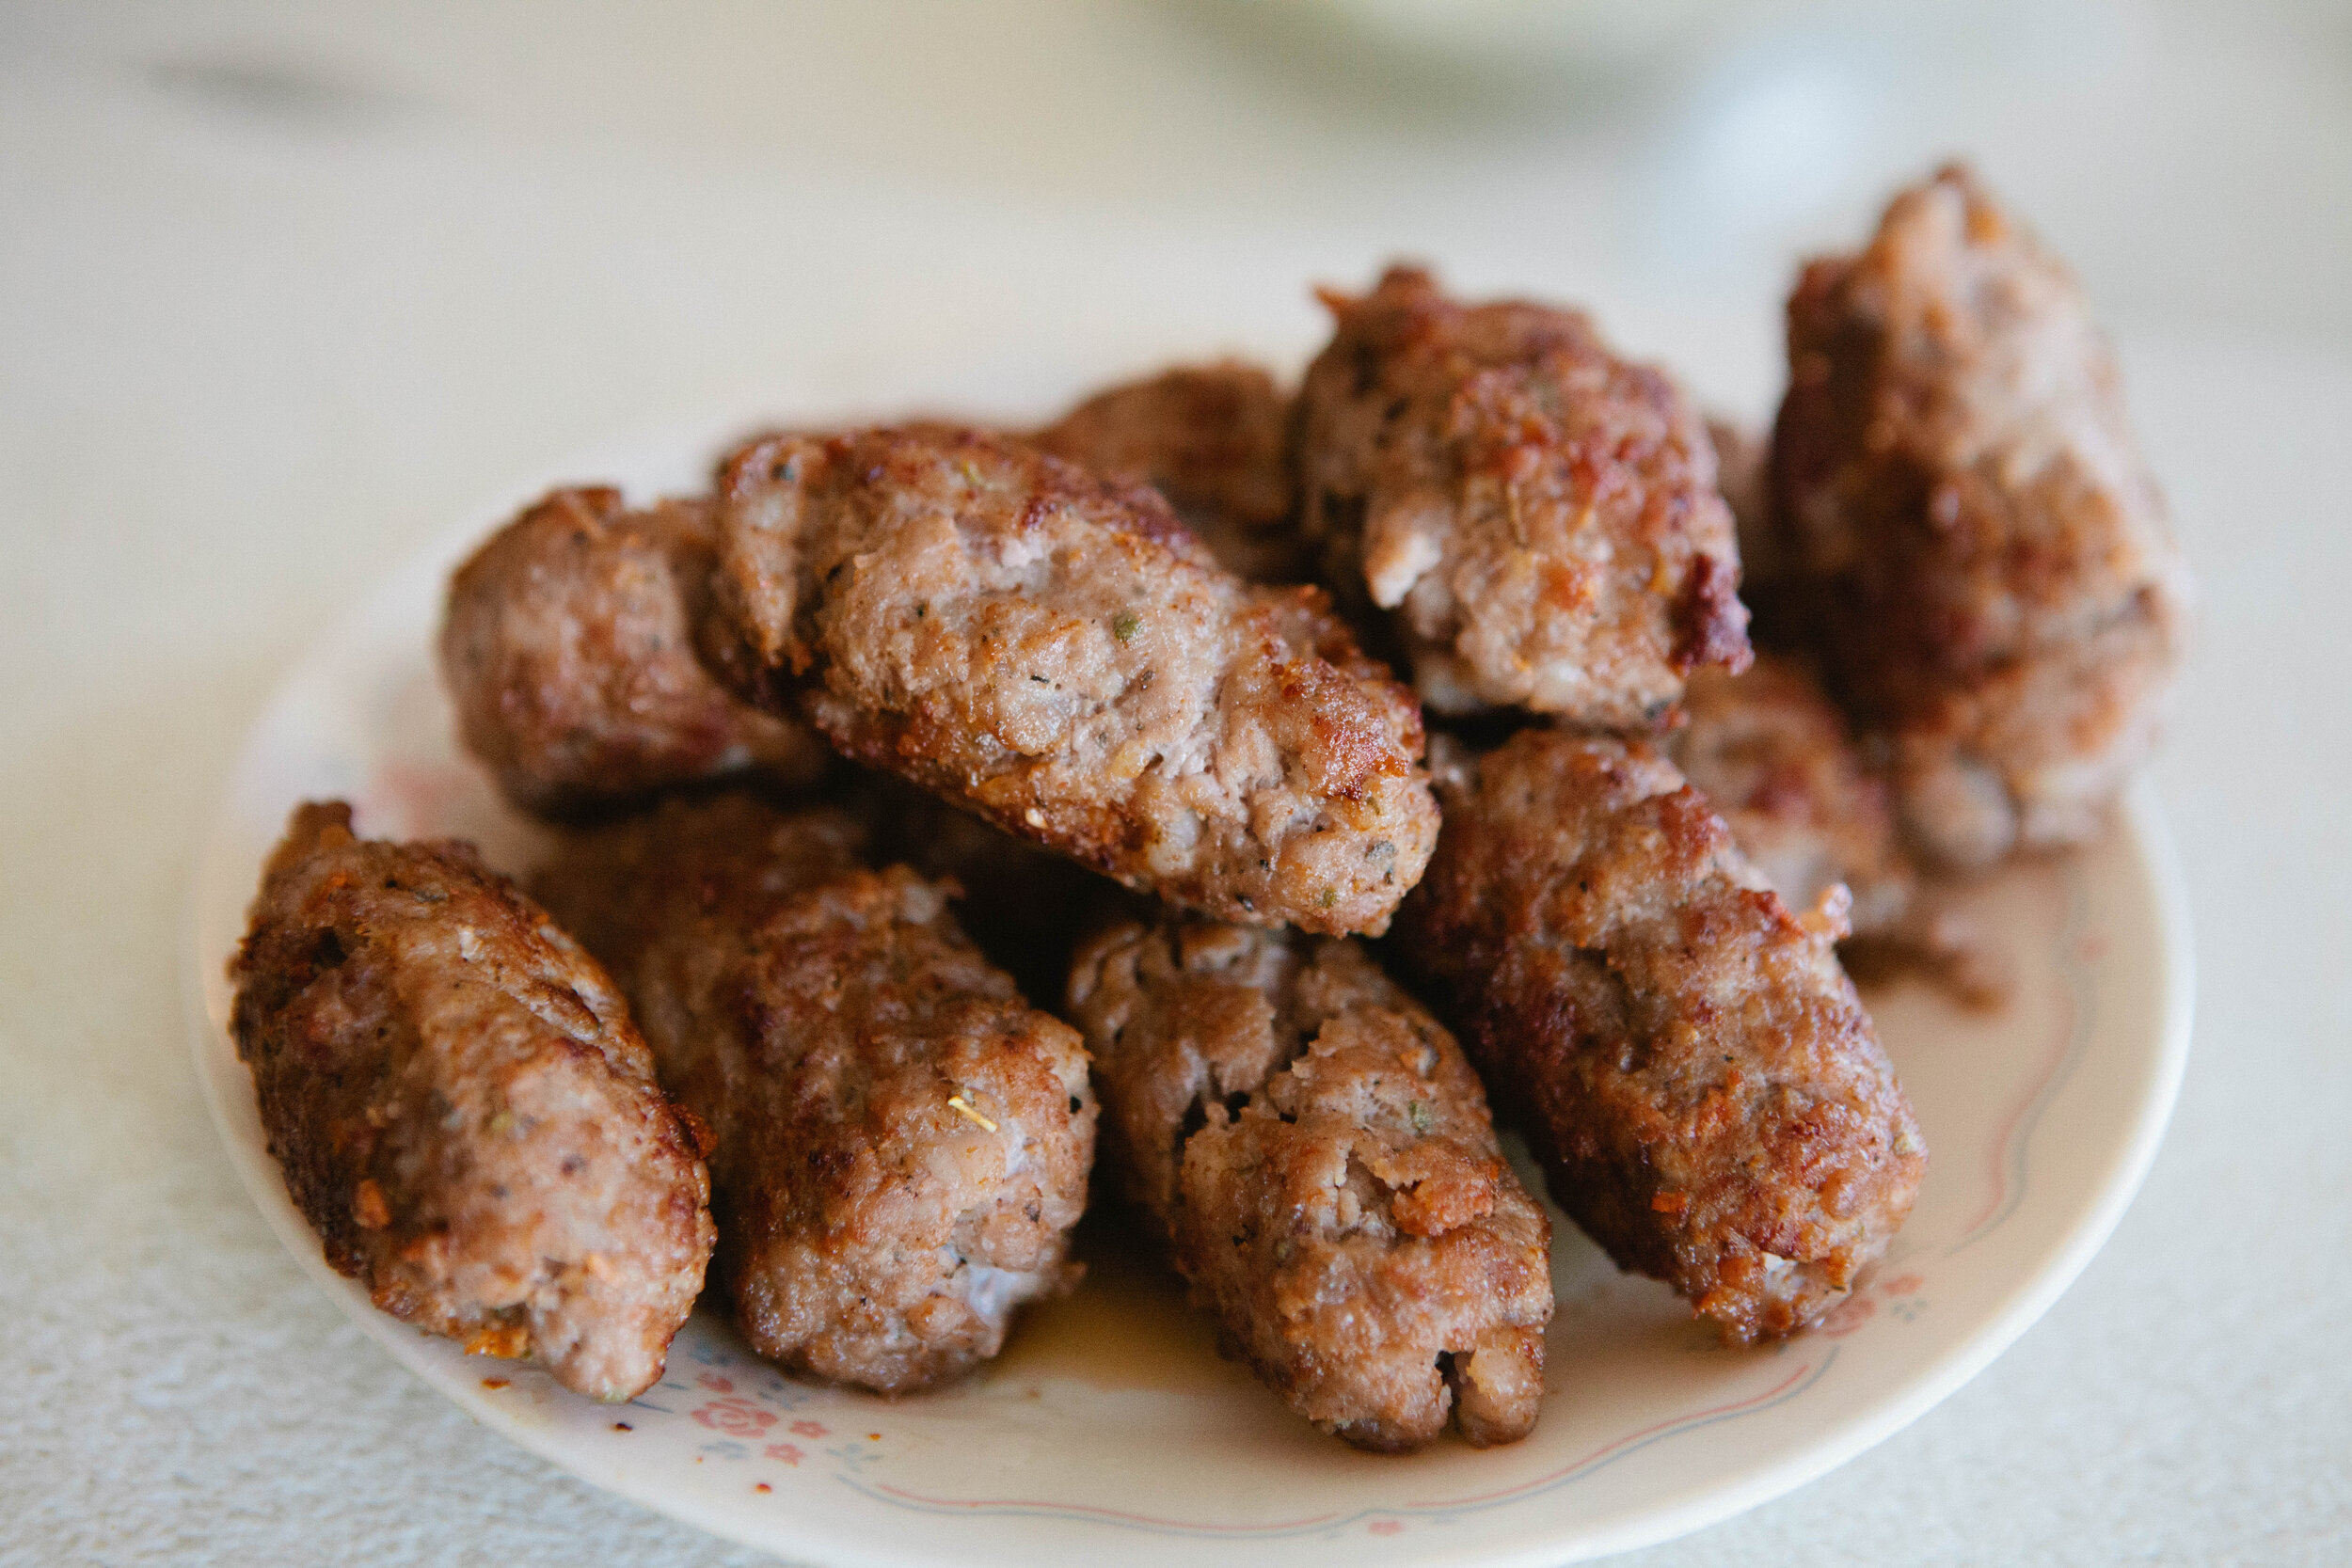 This sausage tastes similar to Jimmy Dean’s sausages but you make it yourself and it’s GAPS Legal! See more ideas for how to meal prep on the GAPS Diet. Recipes by Amy Mihaly, Certified GAPS Practitioner in Colorado.